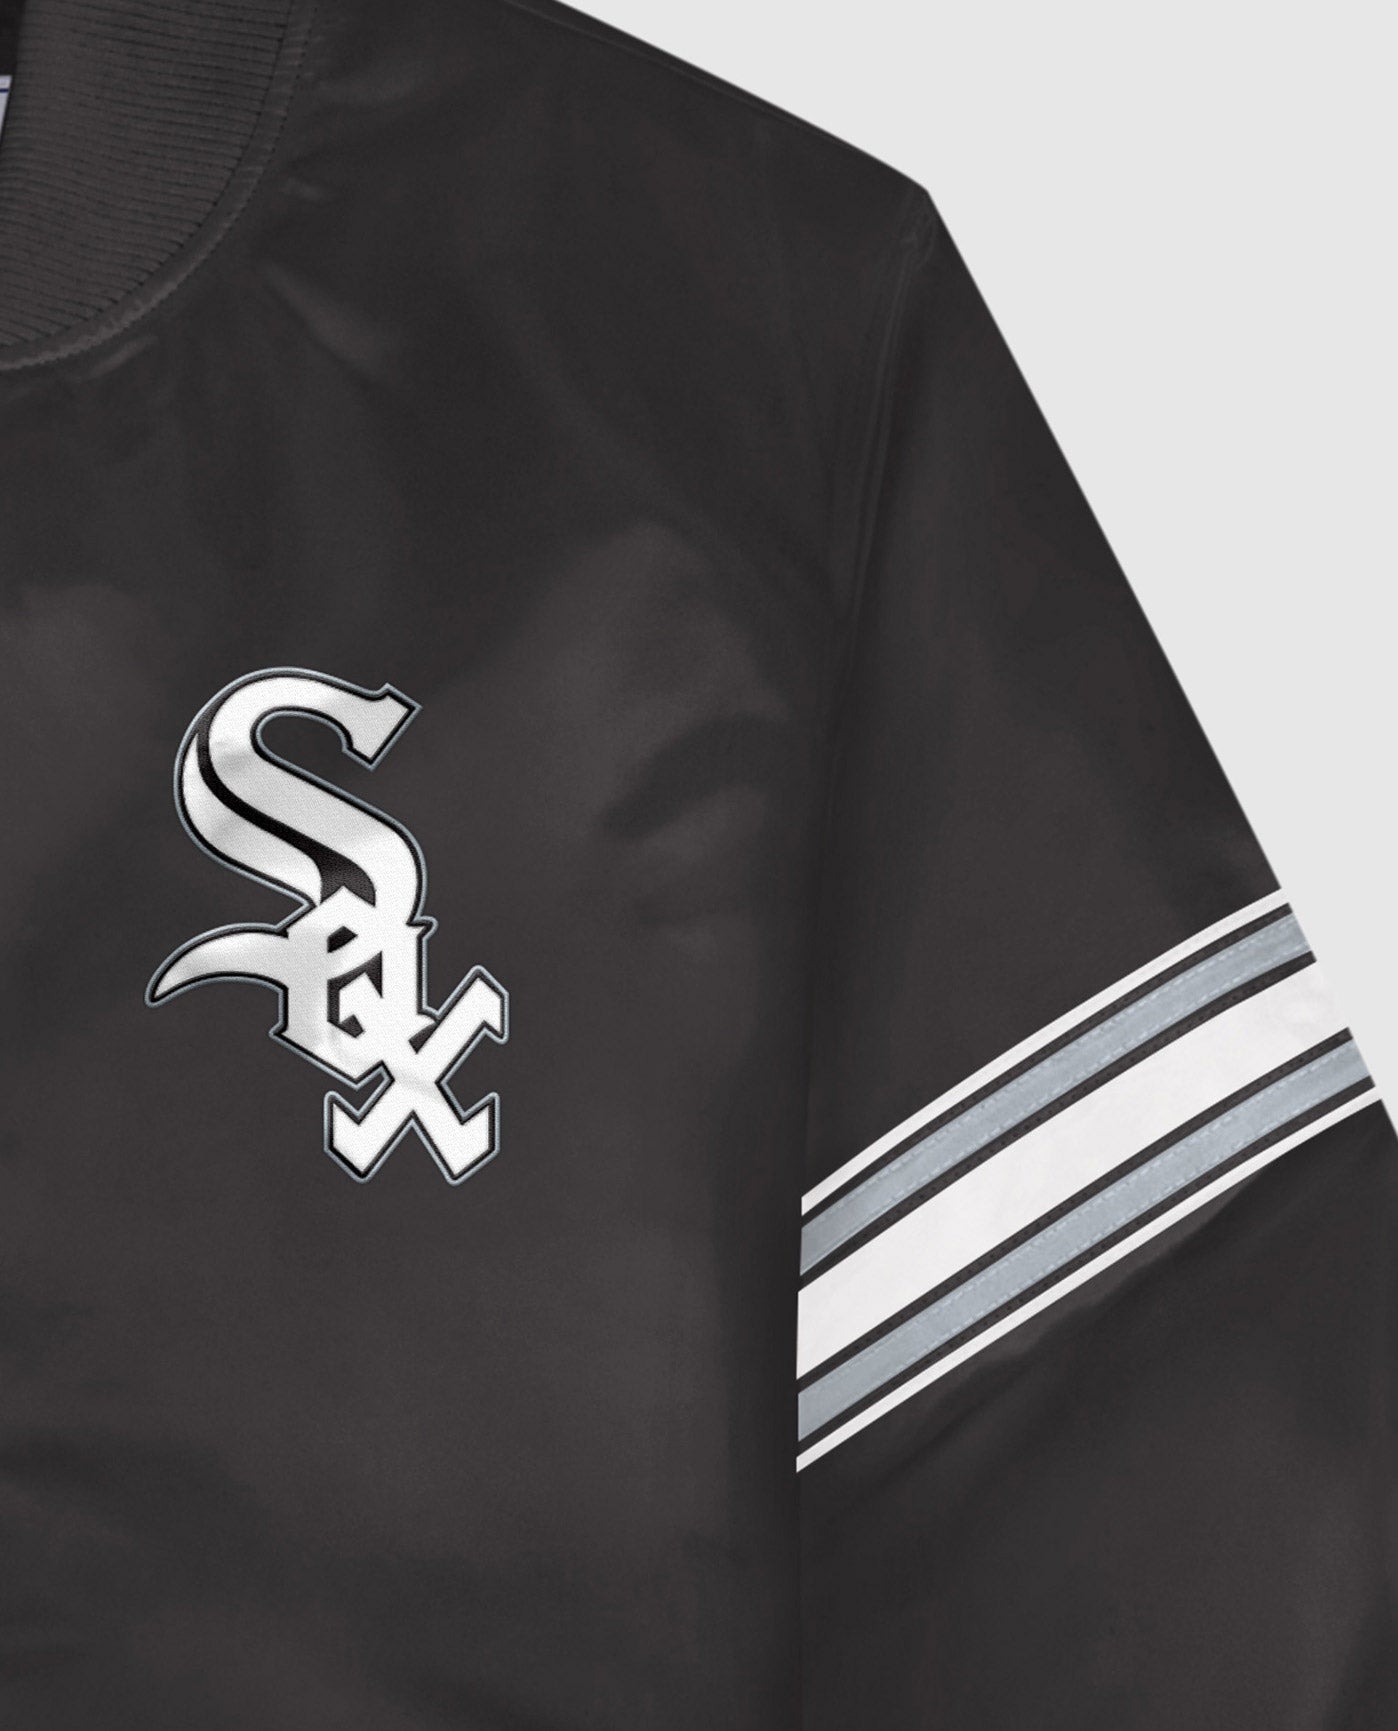 Chicago White Sox Twill Applique Logo And Color Stripe Sleeve | Black